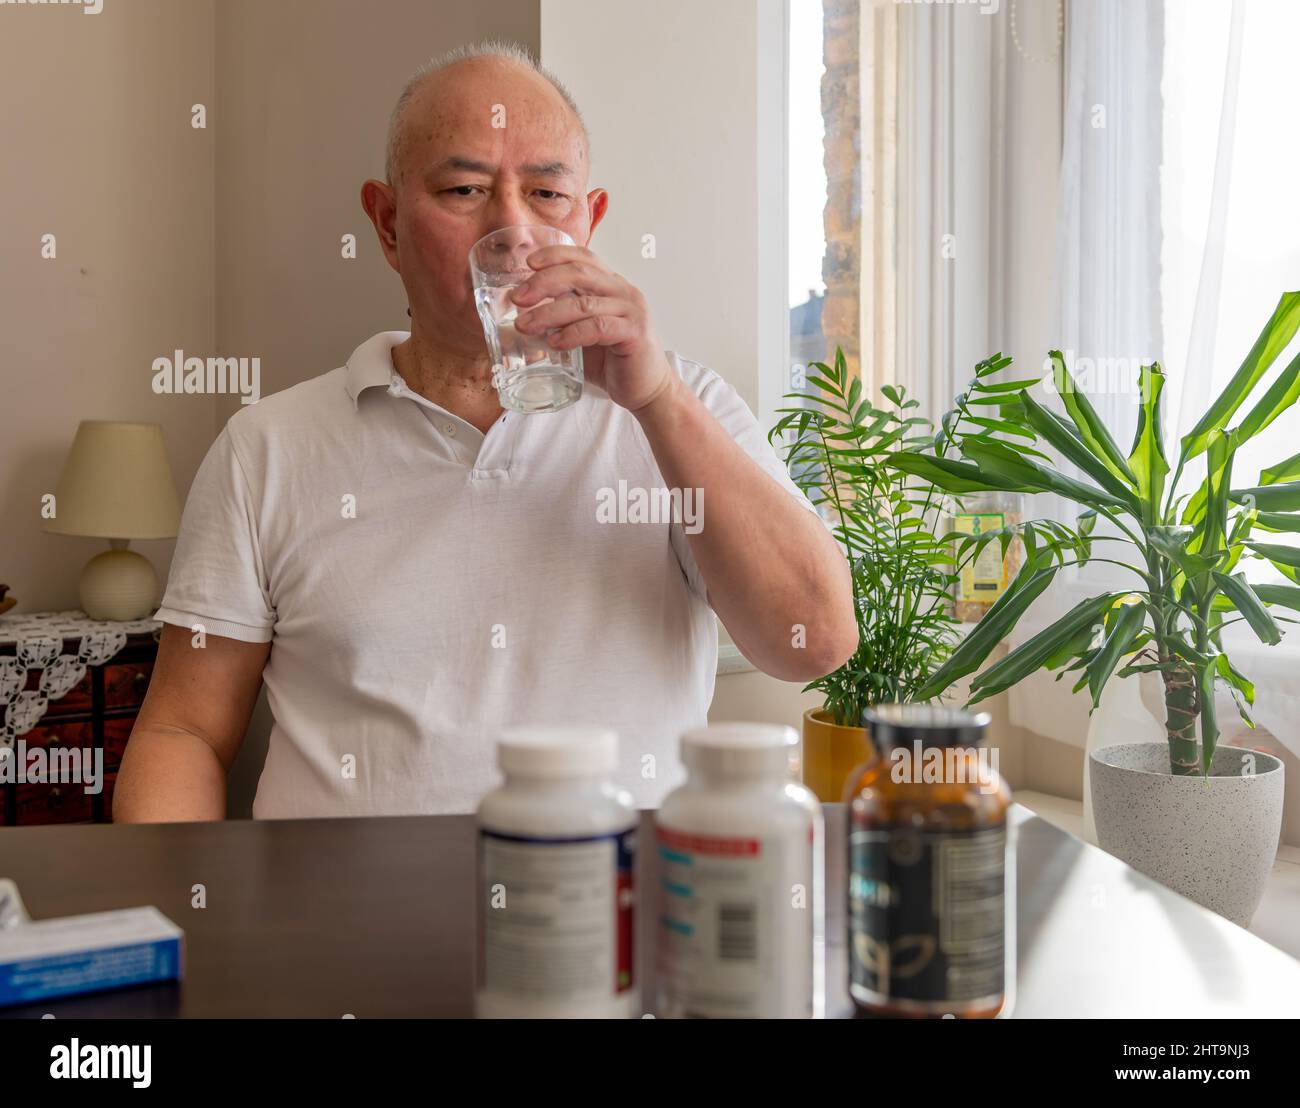 A matured senior man taking medicine and health supplements at home. Stock Photo